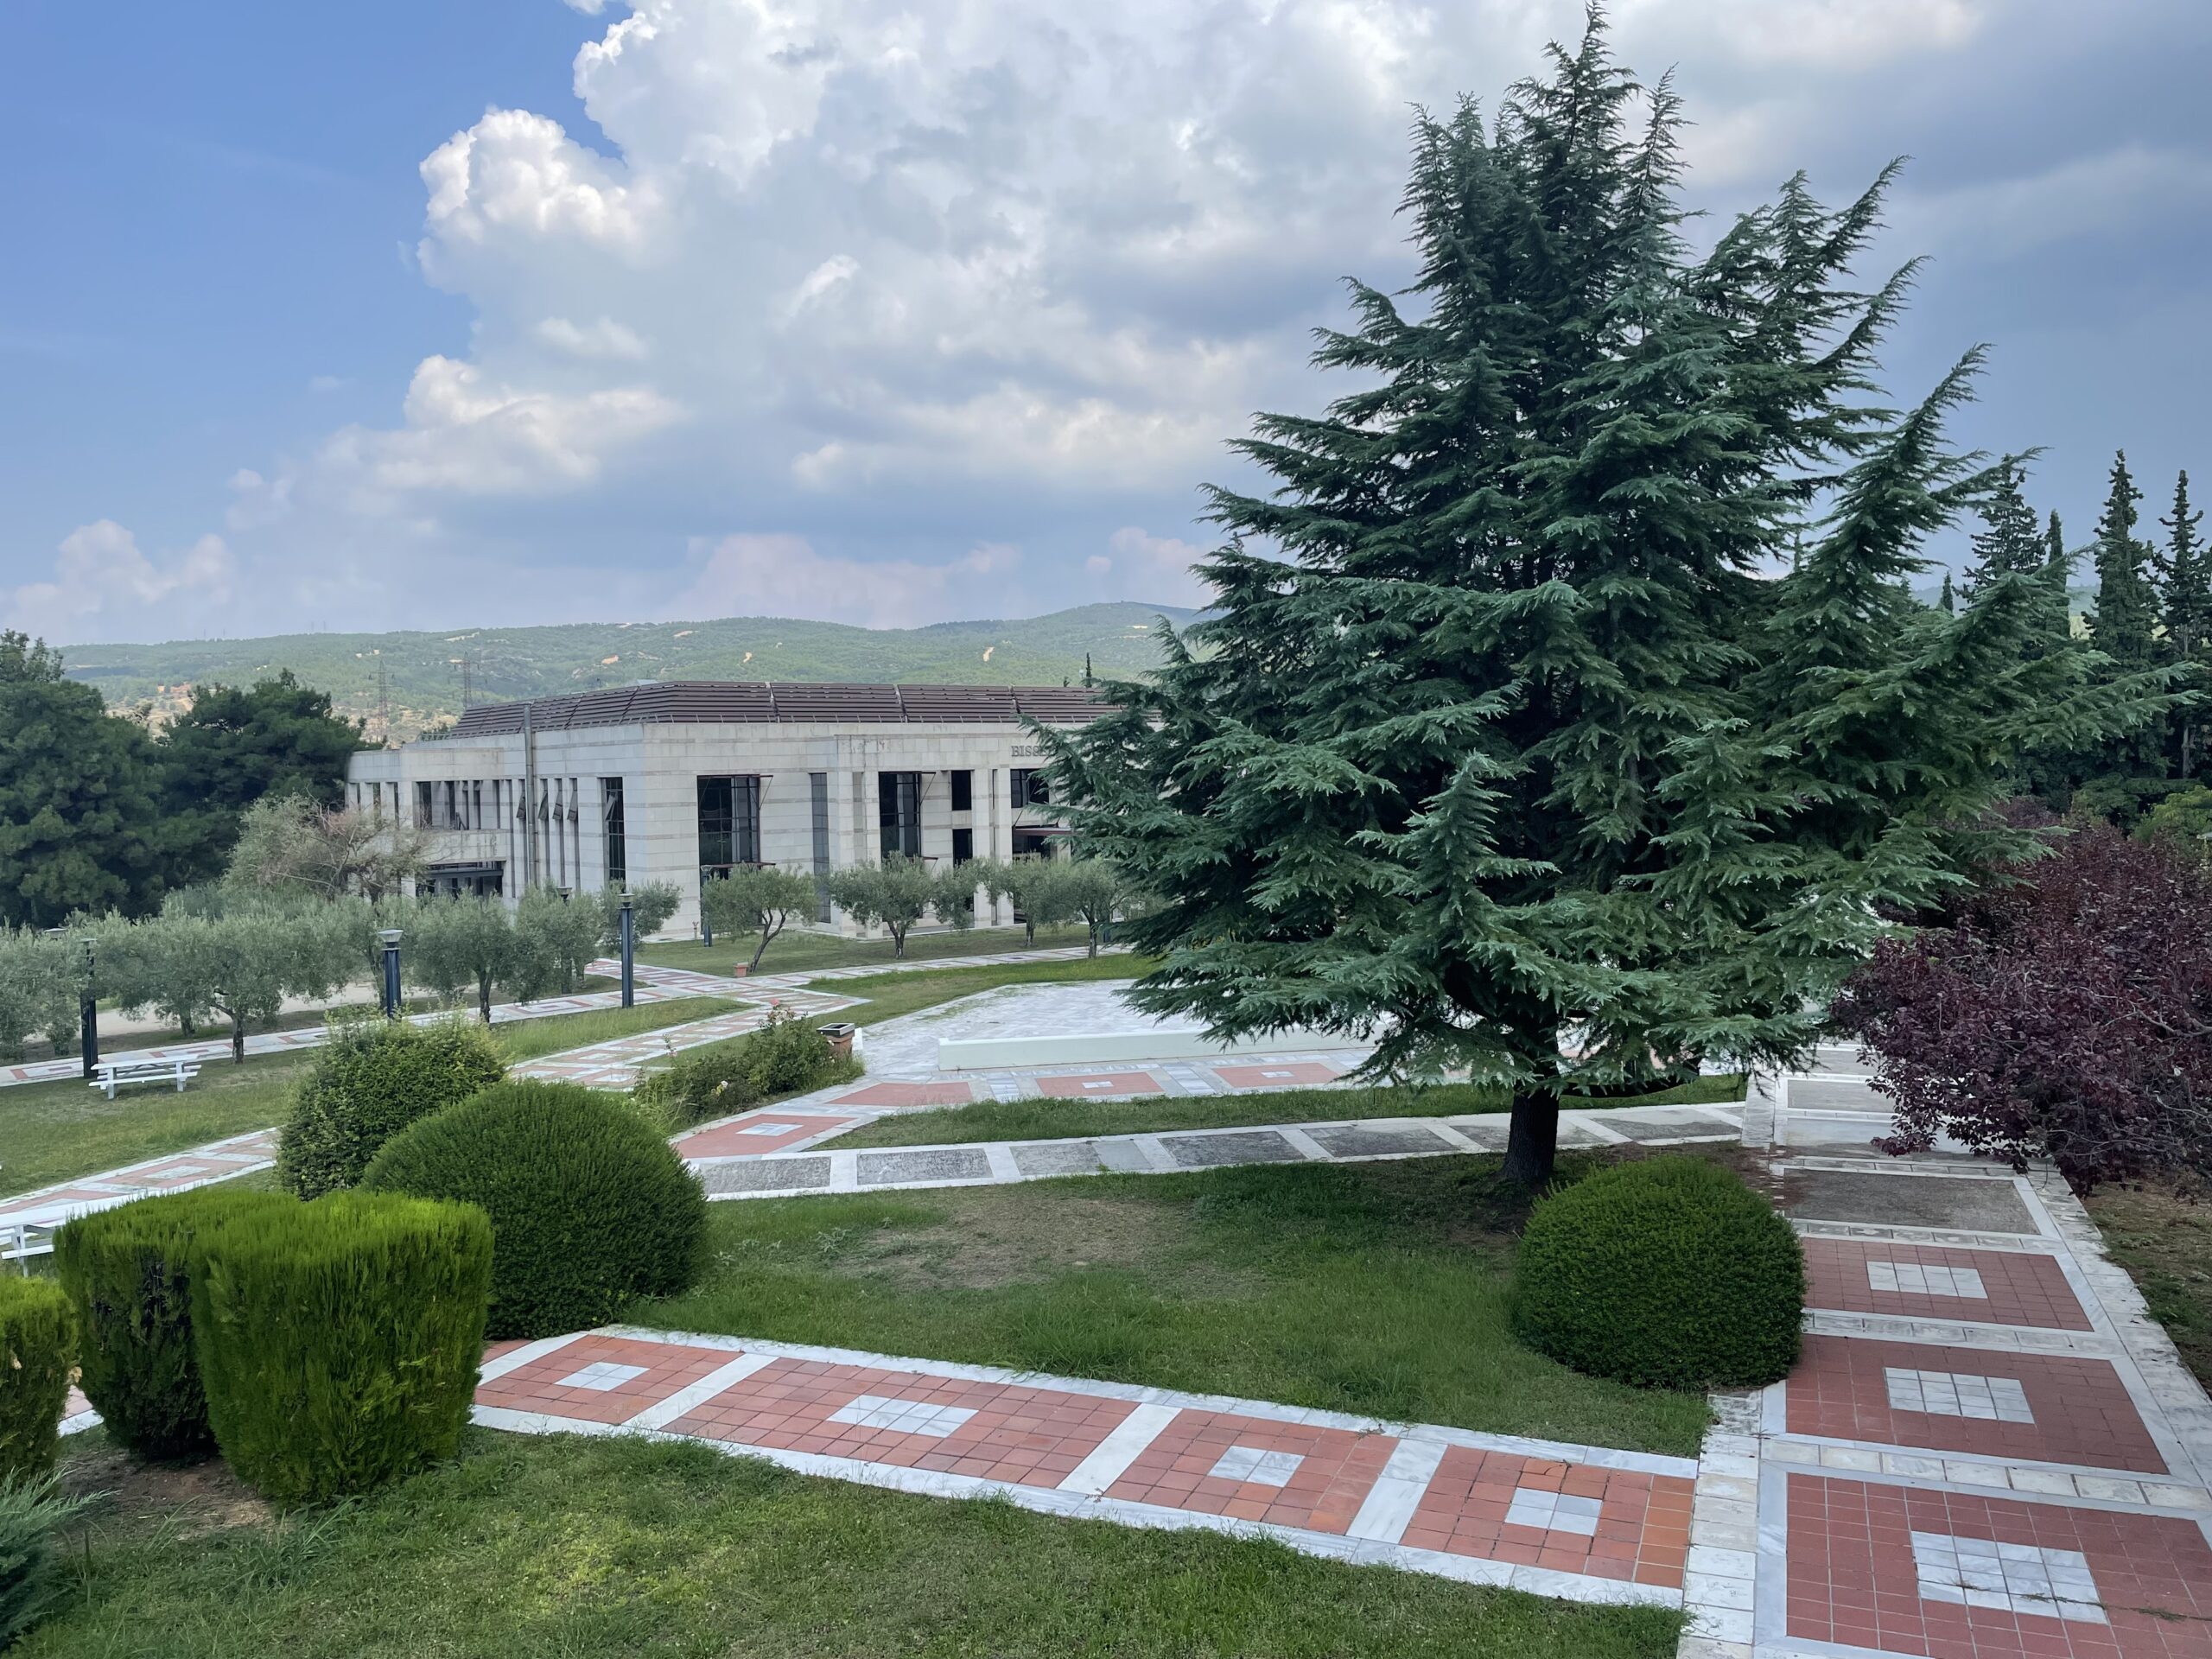 A campus lawn in Greece with red and white square tiles on the walkways between grass with cypress and olive trees. A stone library sits on the other side.